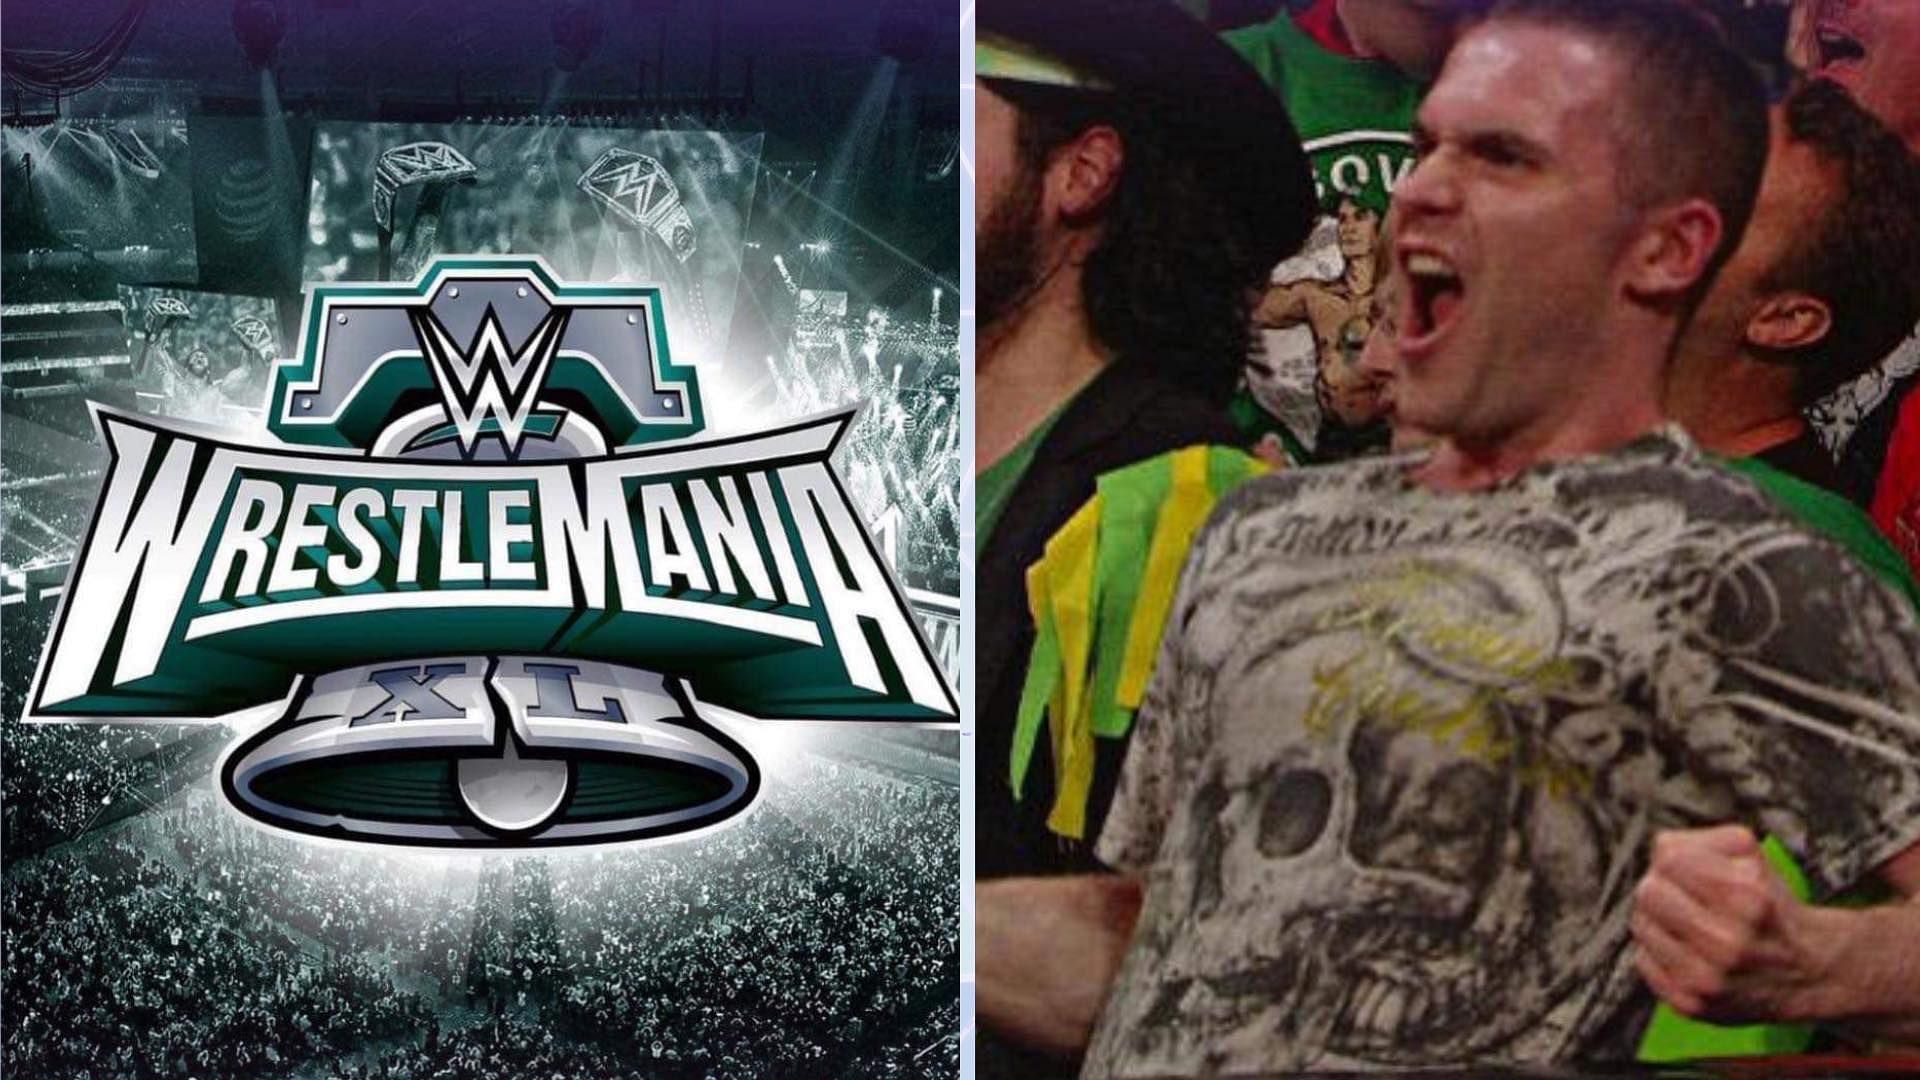 WrestleMania 40 is set to take place at Lincoln Financial Field in PhiladelphiaM